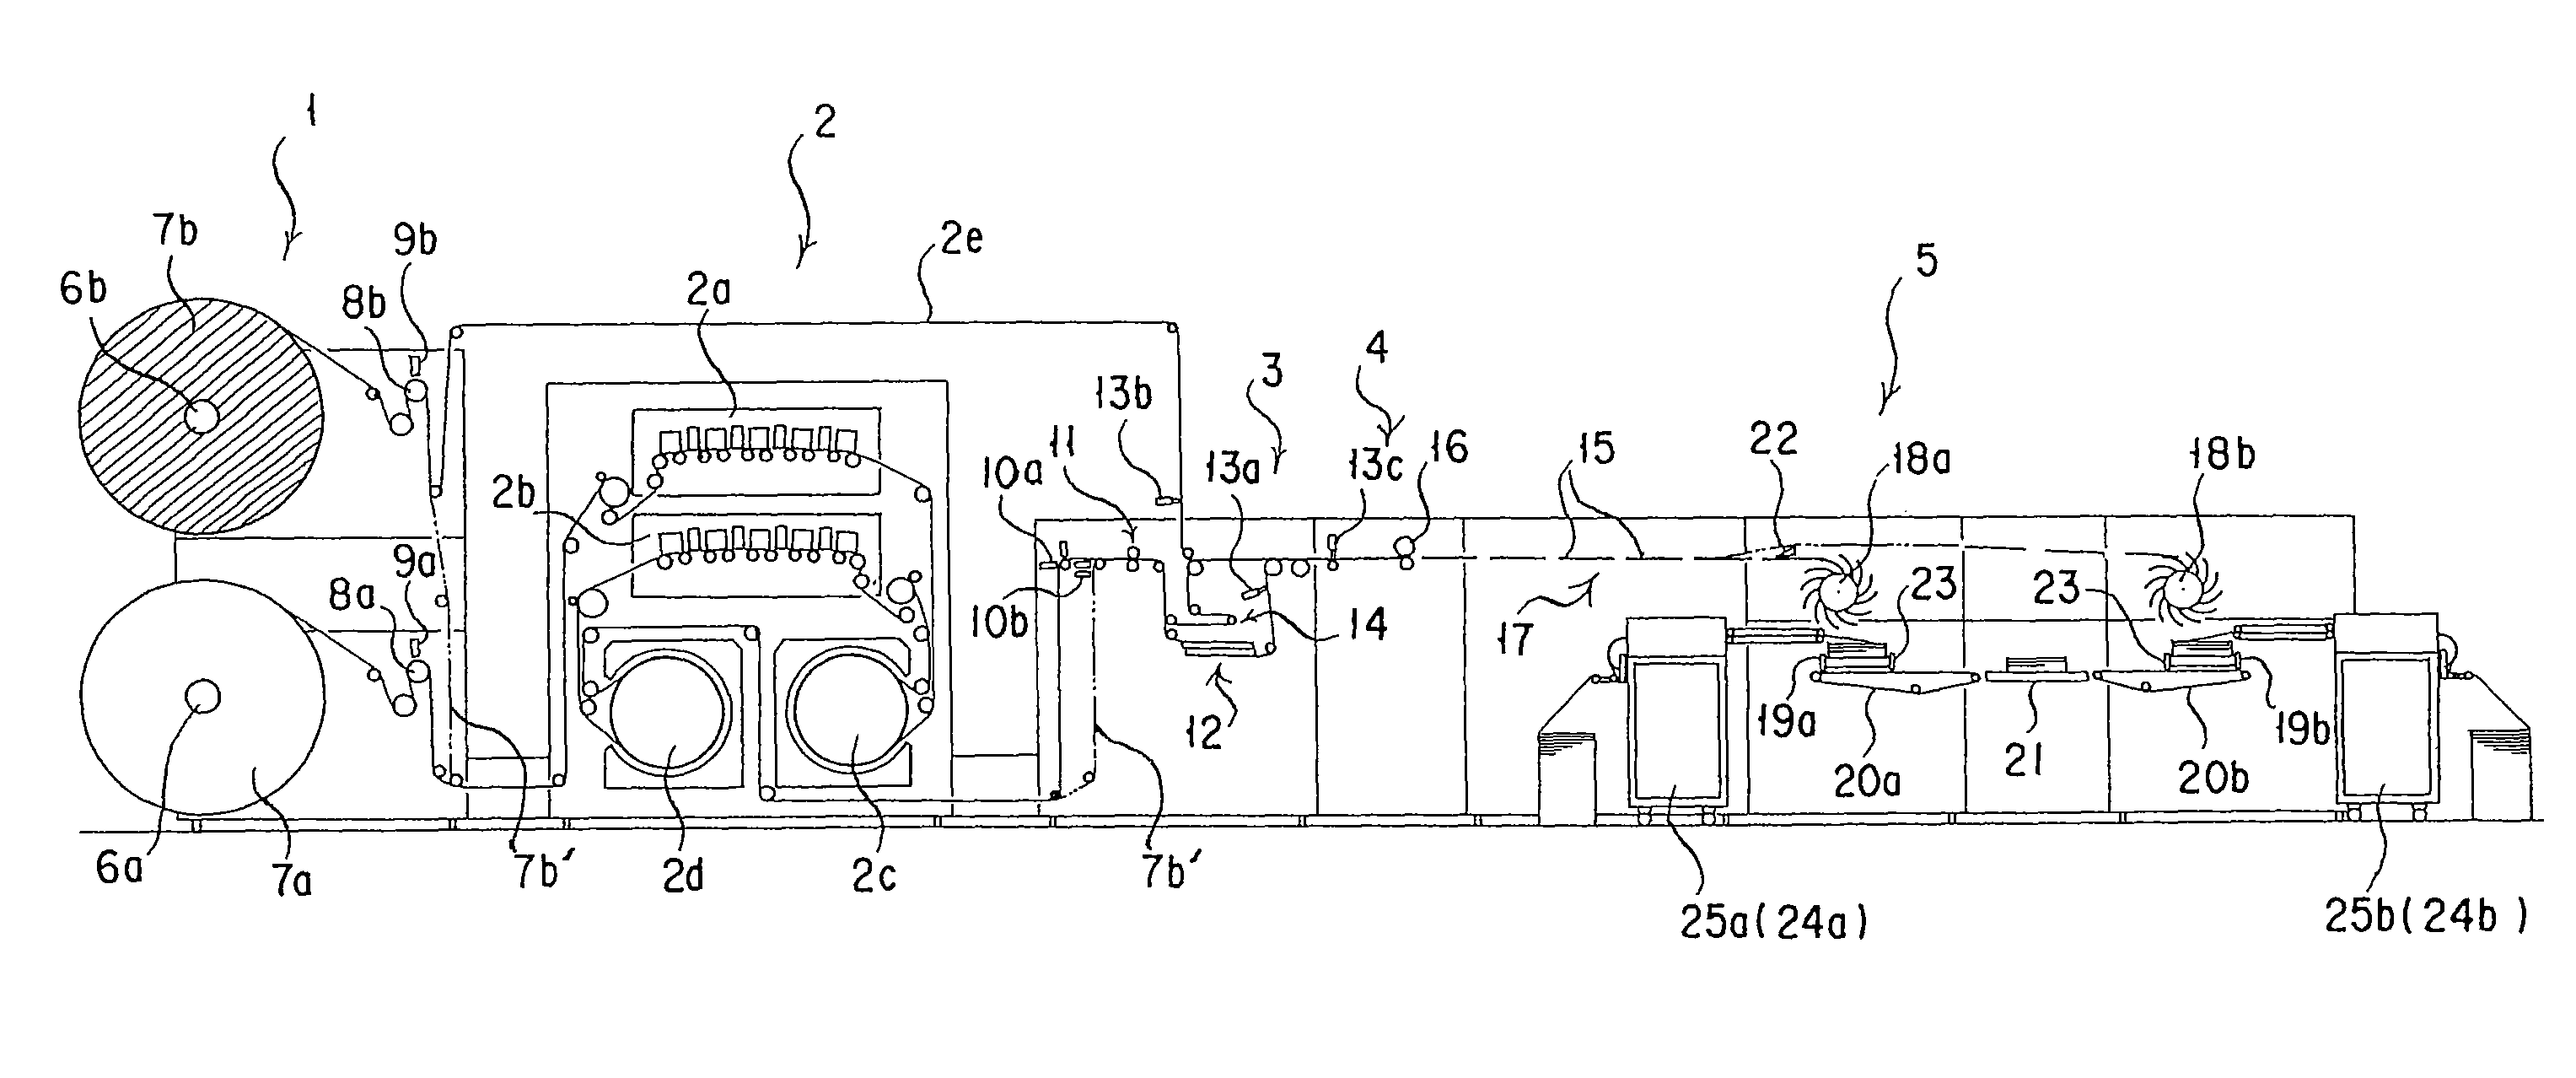 Apparatus for making a booklet-like product